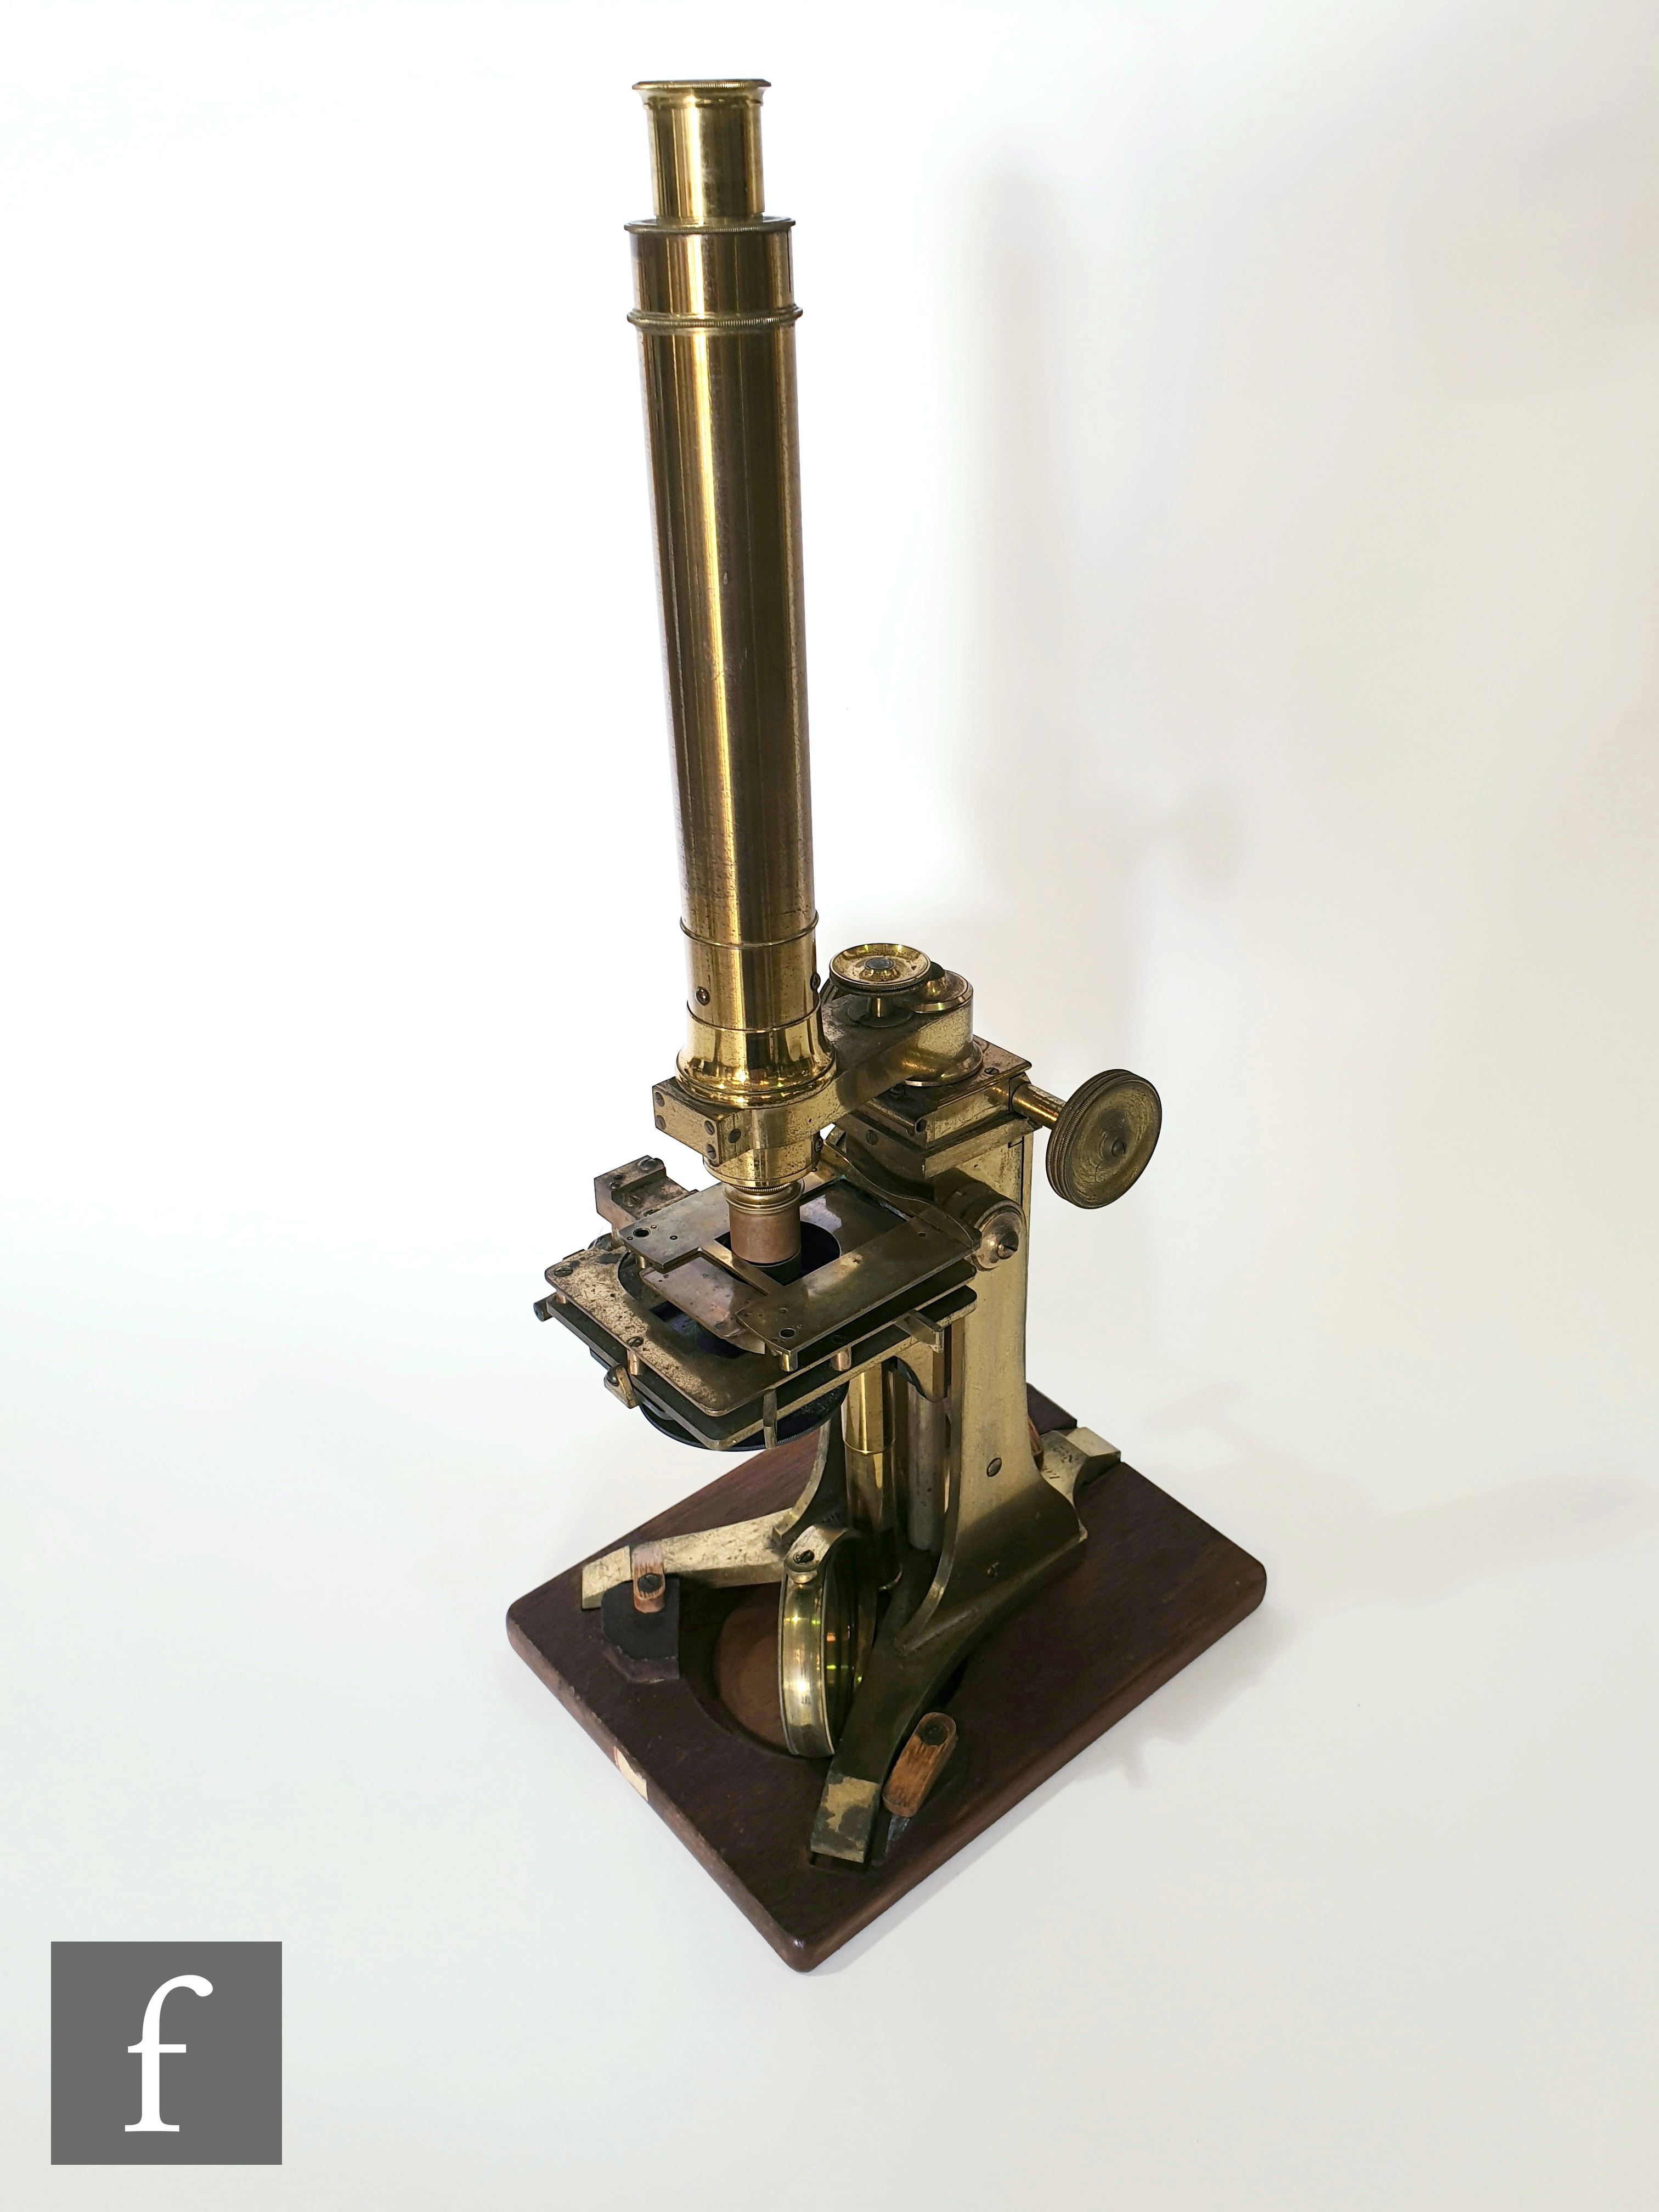 A mid 19th Century Bar-limb brass microscope by Andrew Ross, No 205, with tilt operation and